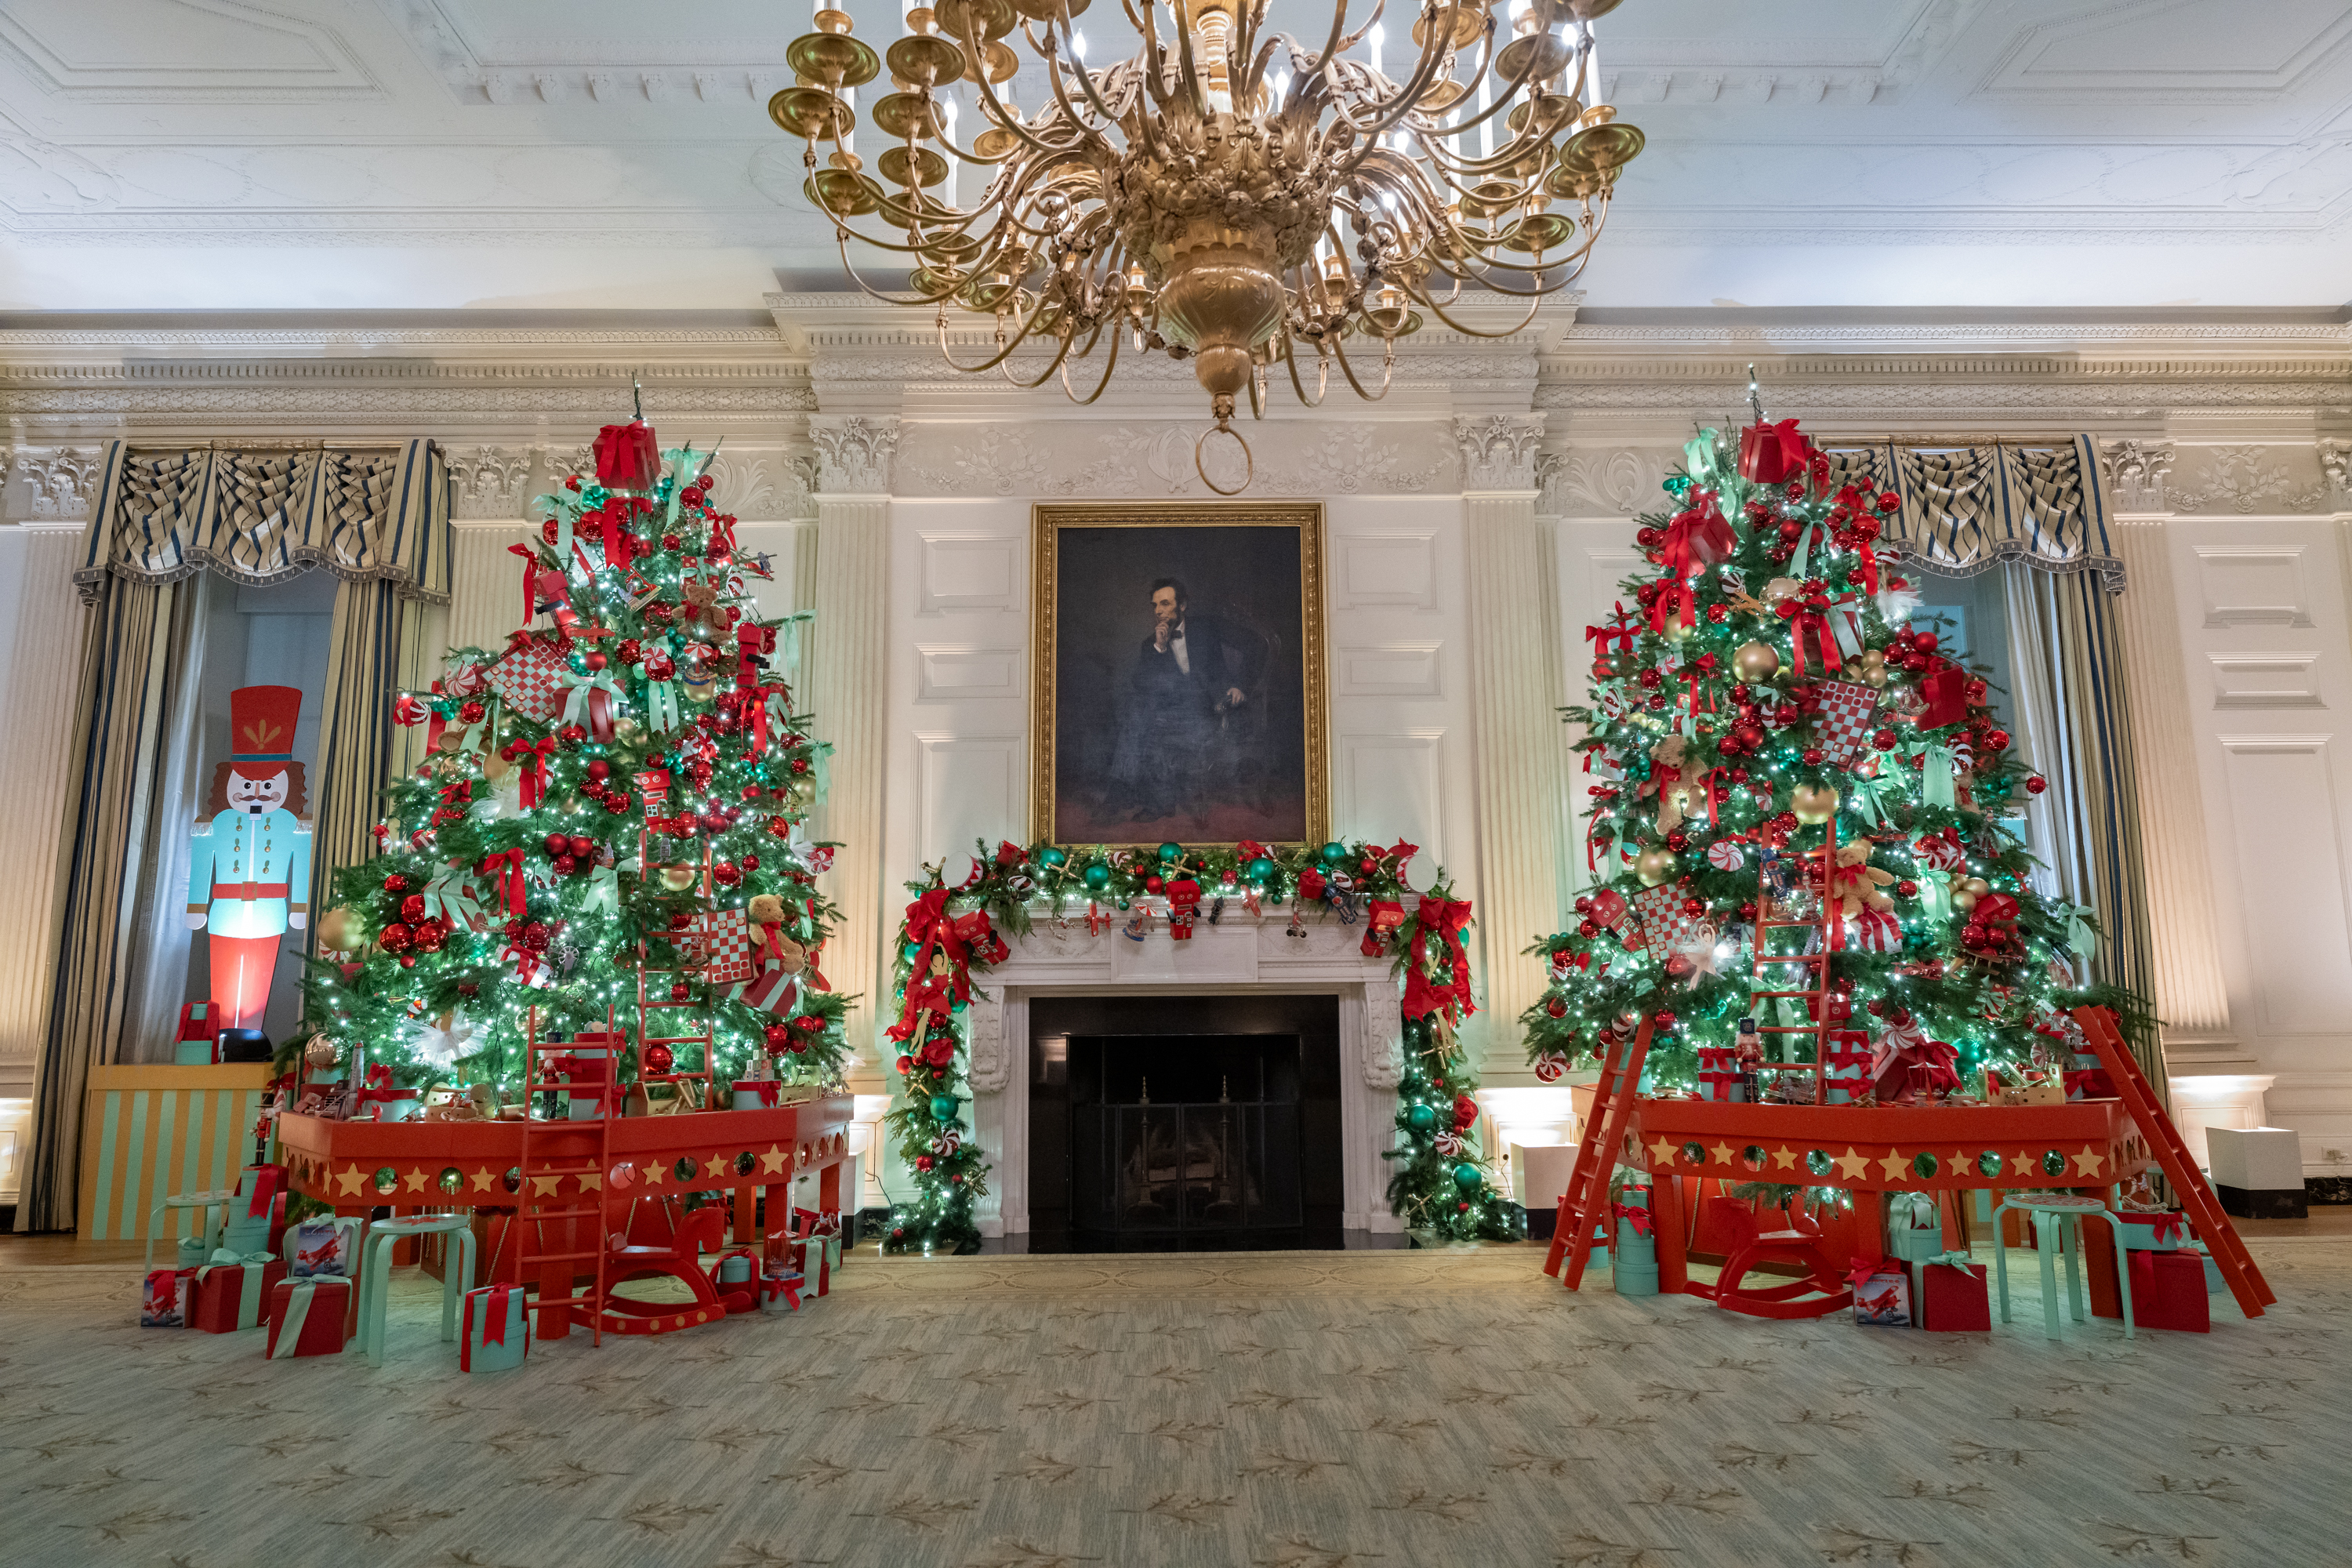 The State Dinning Room Christmas Decorations